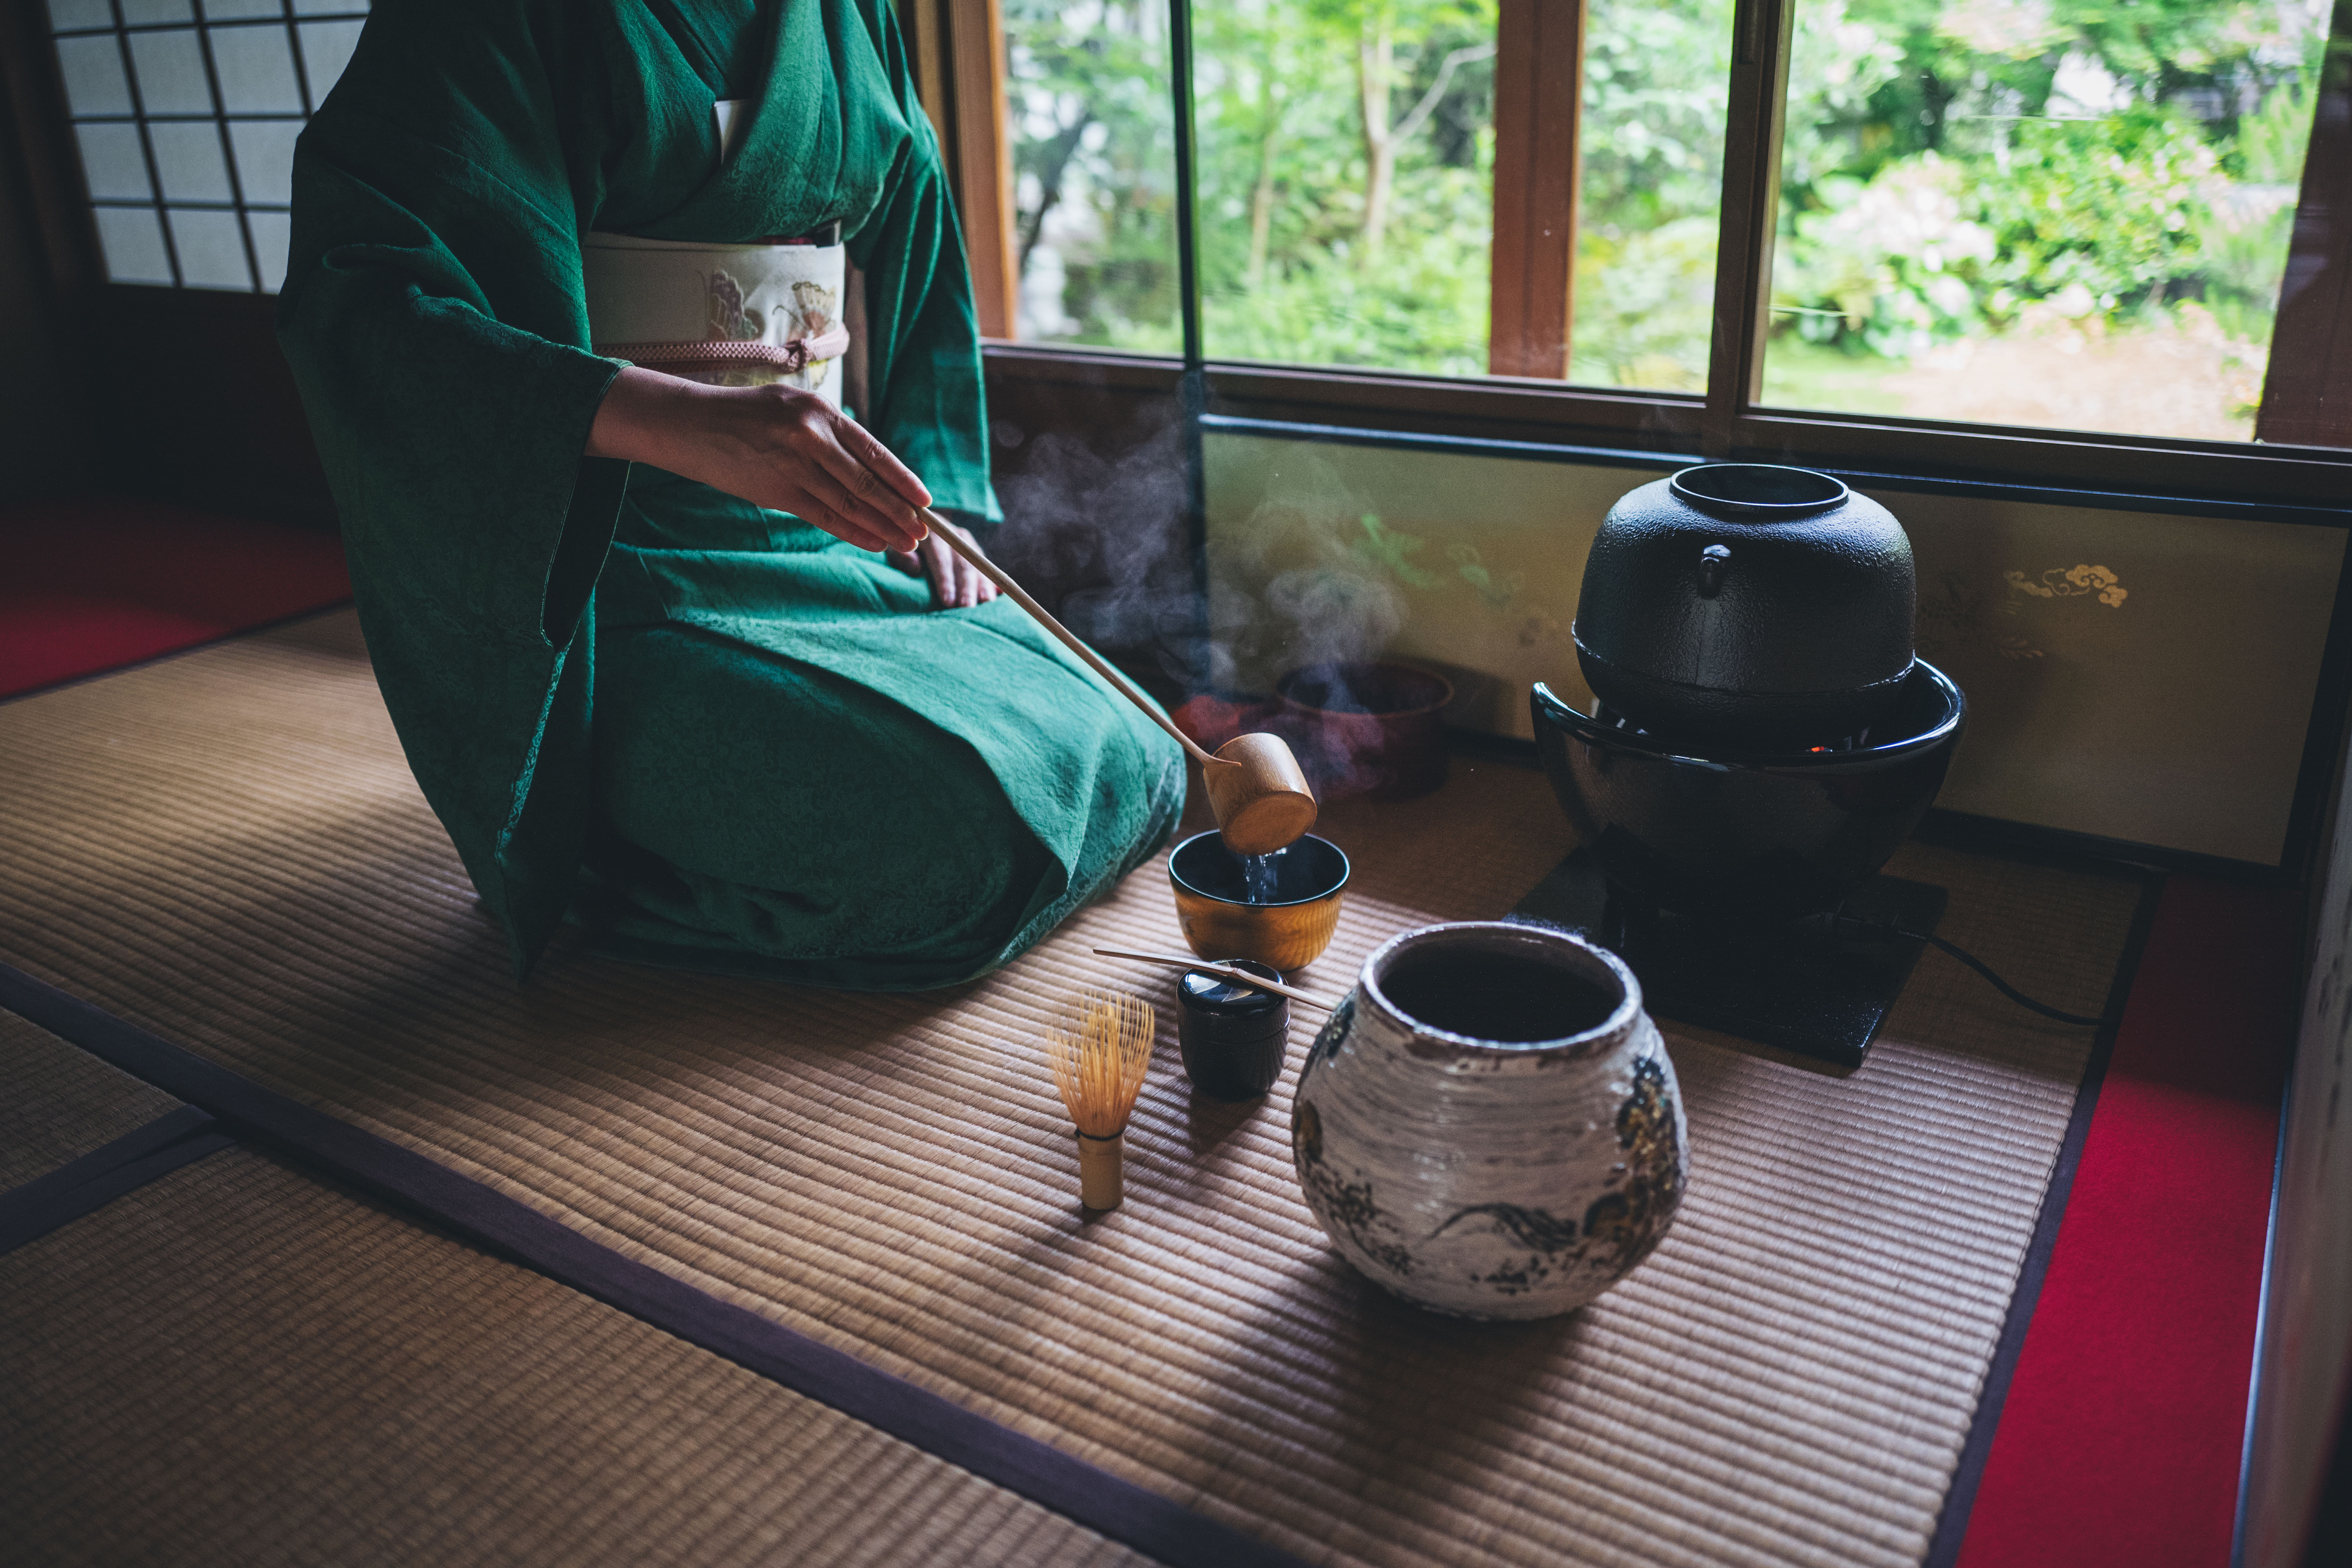 Private tea Ceremony in Kyoto FLOWER TEAHOUSE